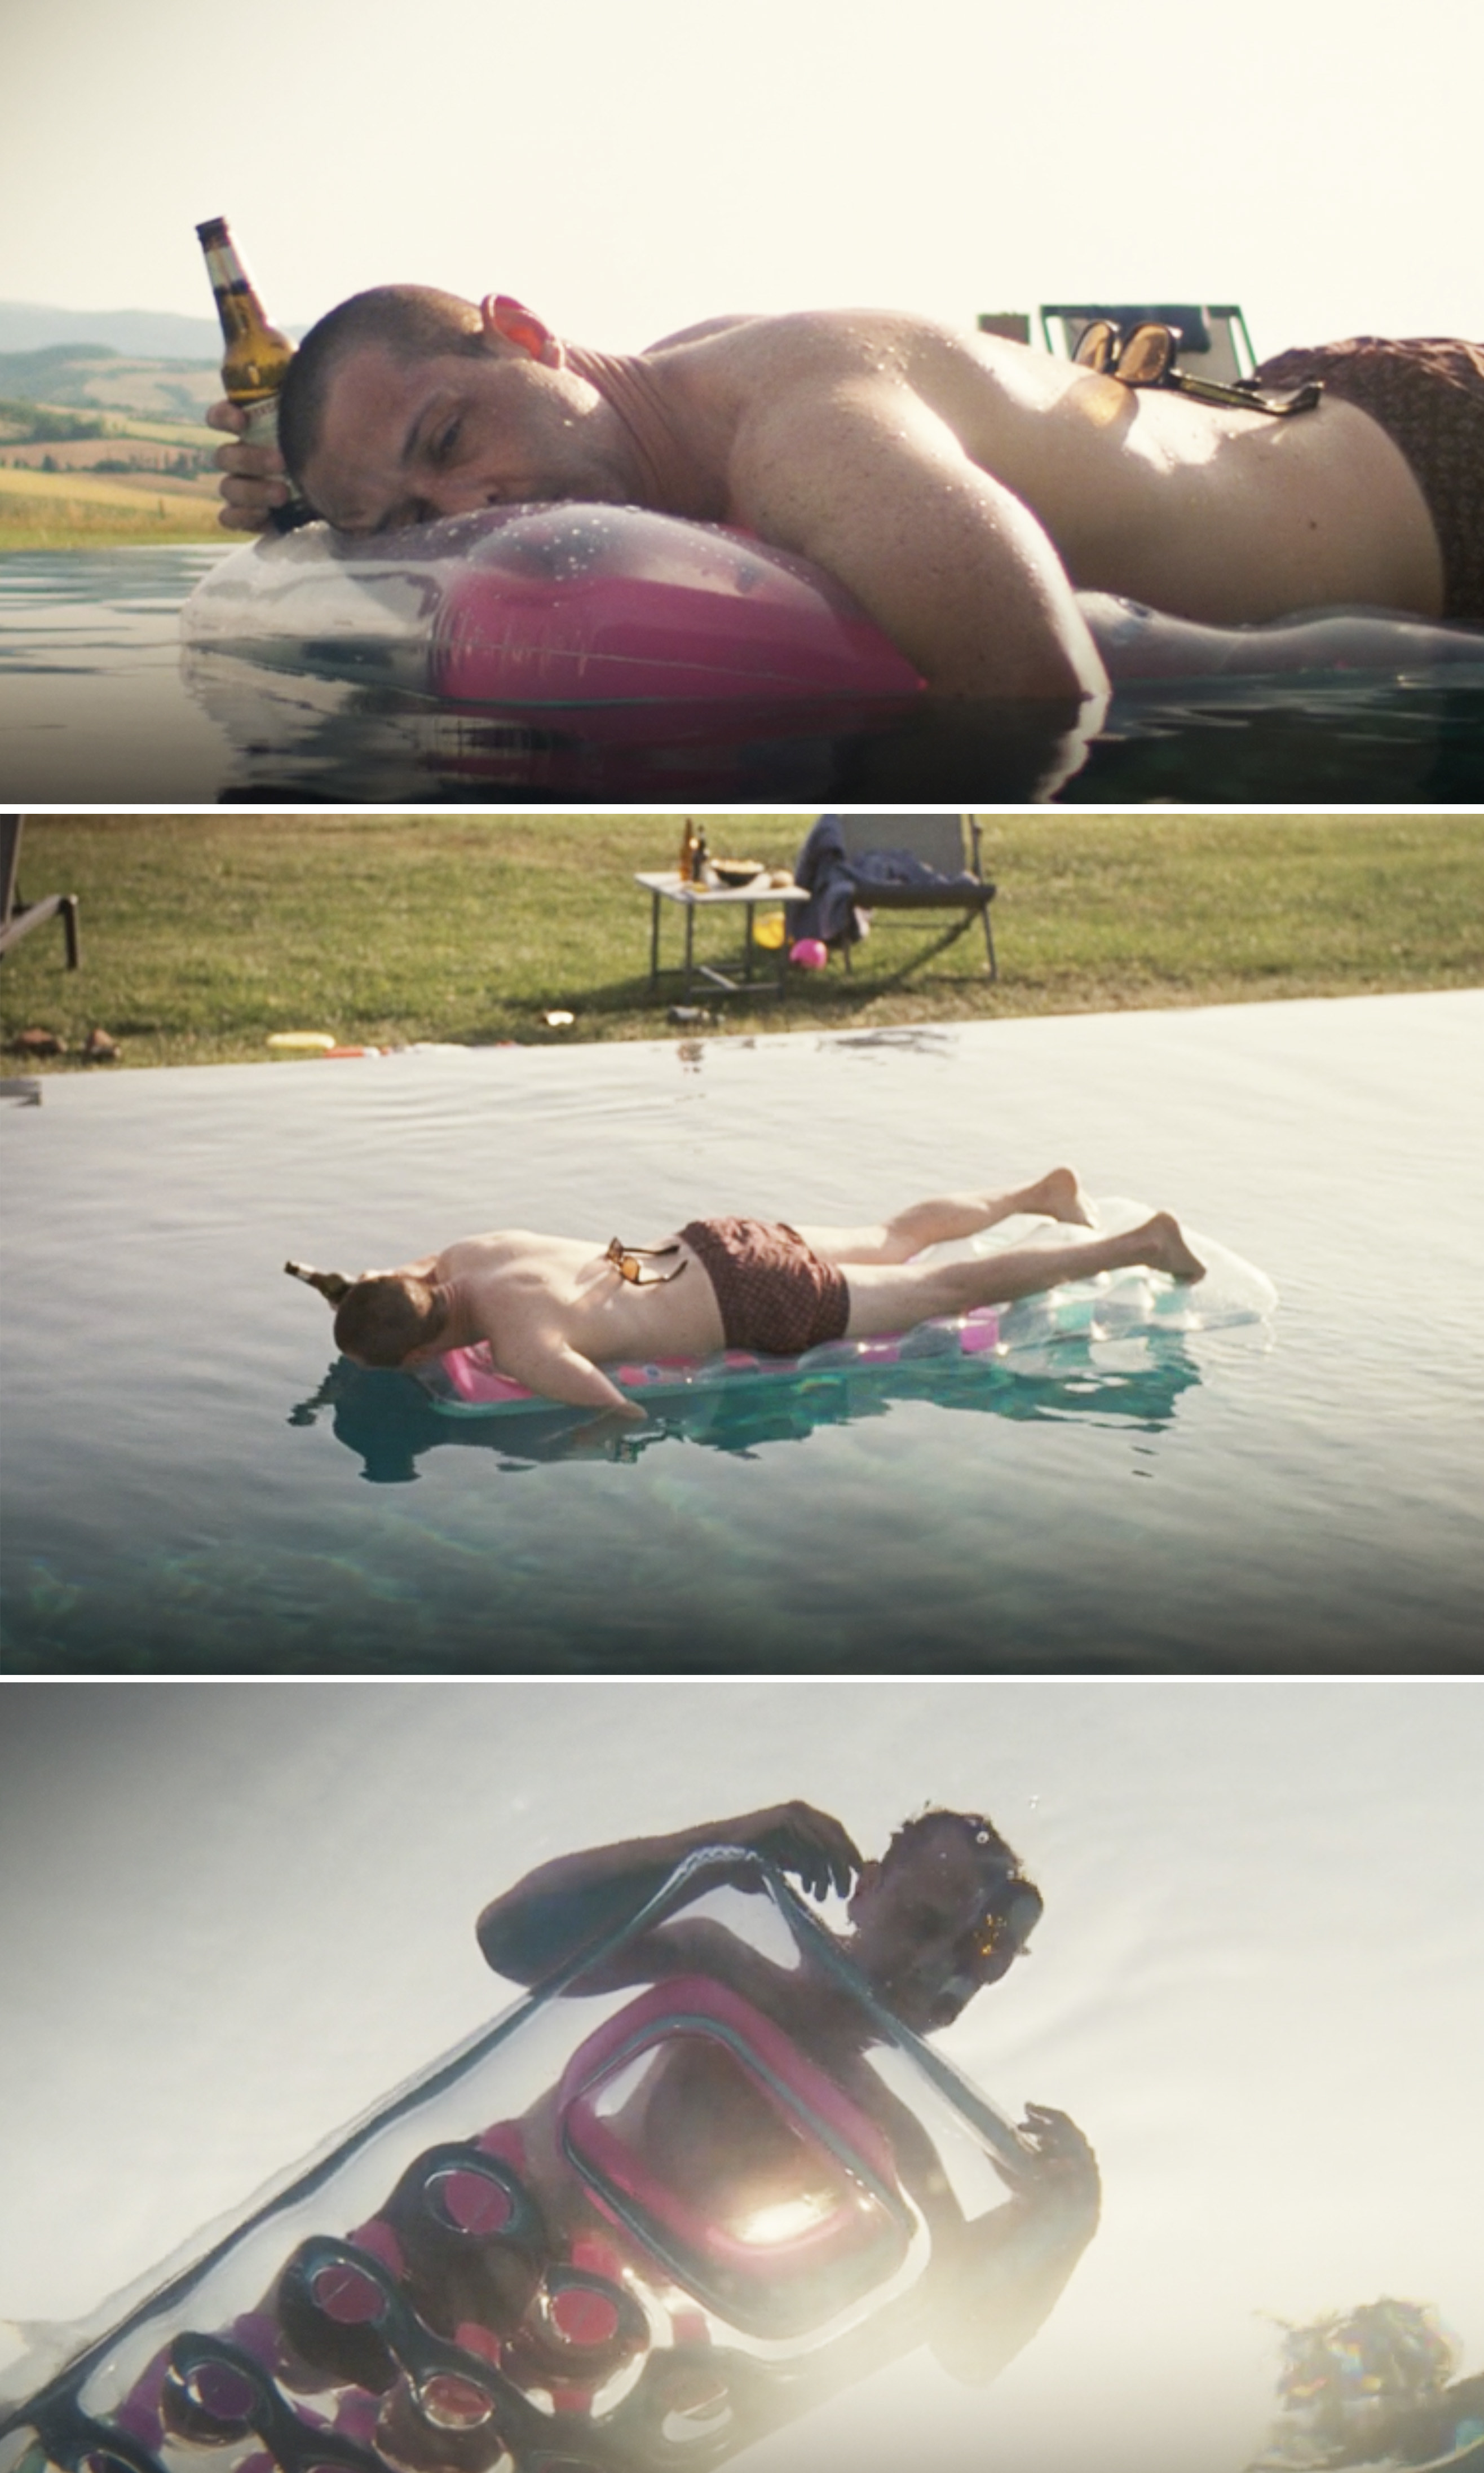 Kendall floating in a pool face down